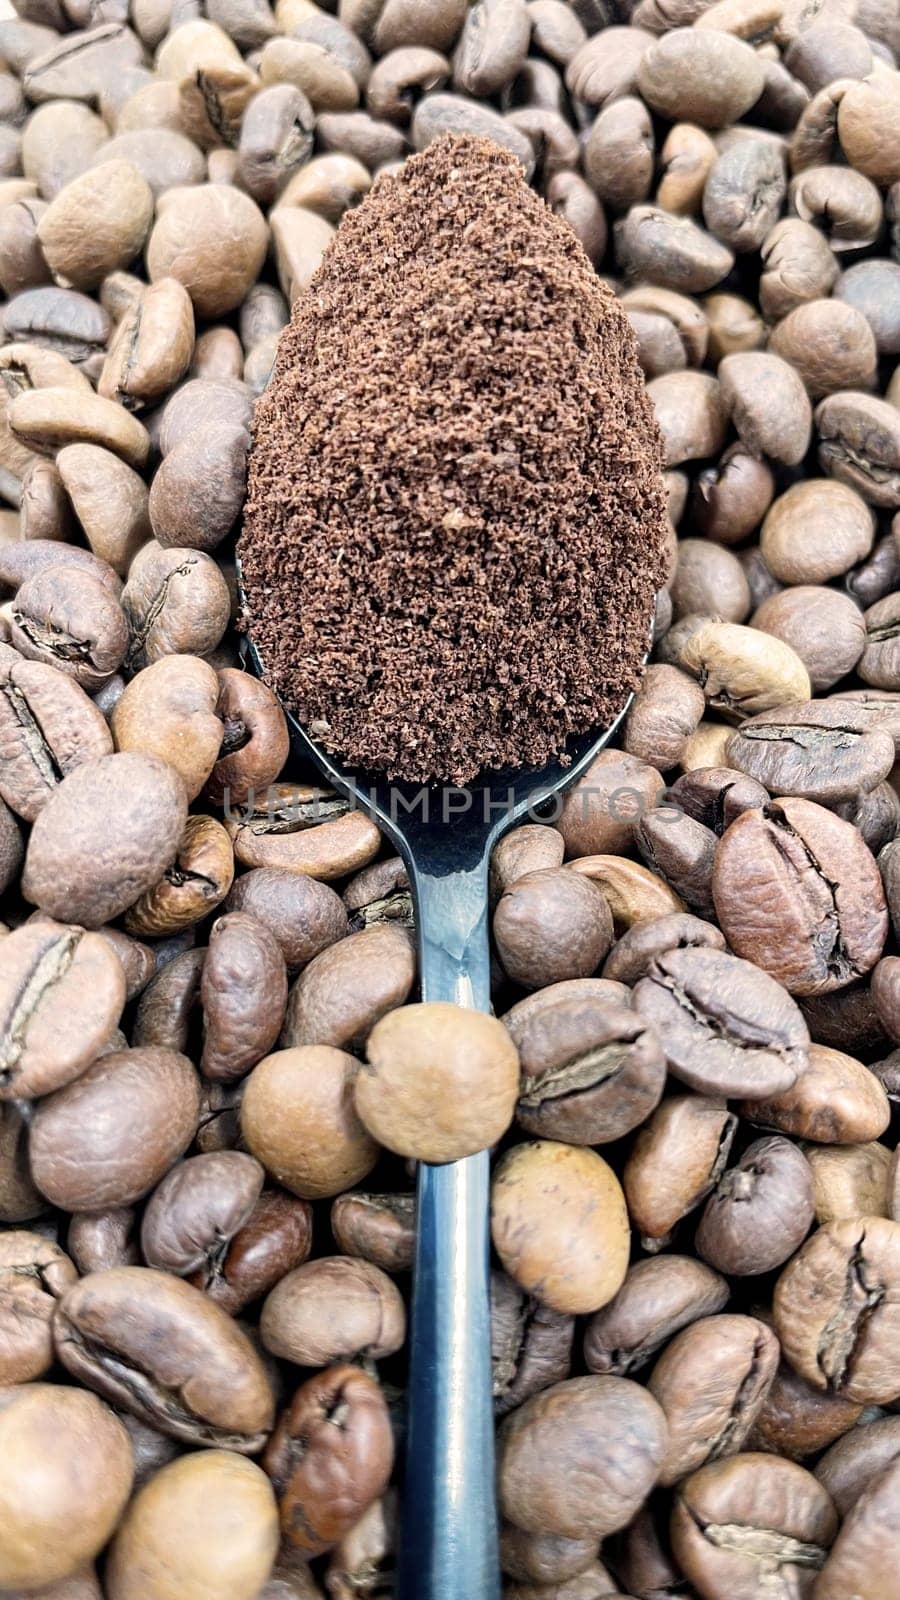 Against the background of roasted aromatic coffee beans lies a metal spoon filled with ground coffee. A drink made from roasted and ground beans from the coffee tree or coffee bush. by Roshchyn